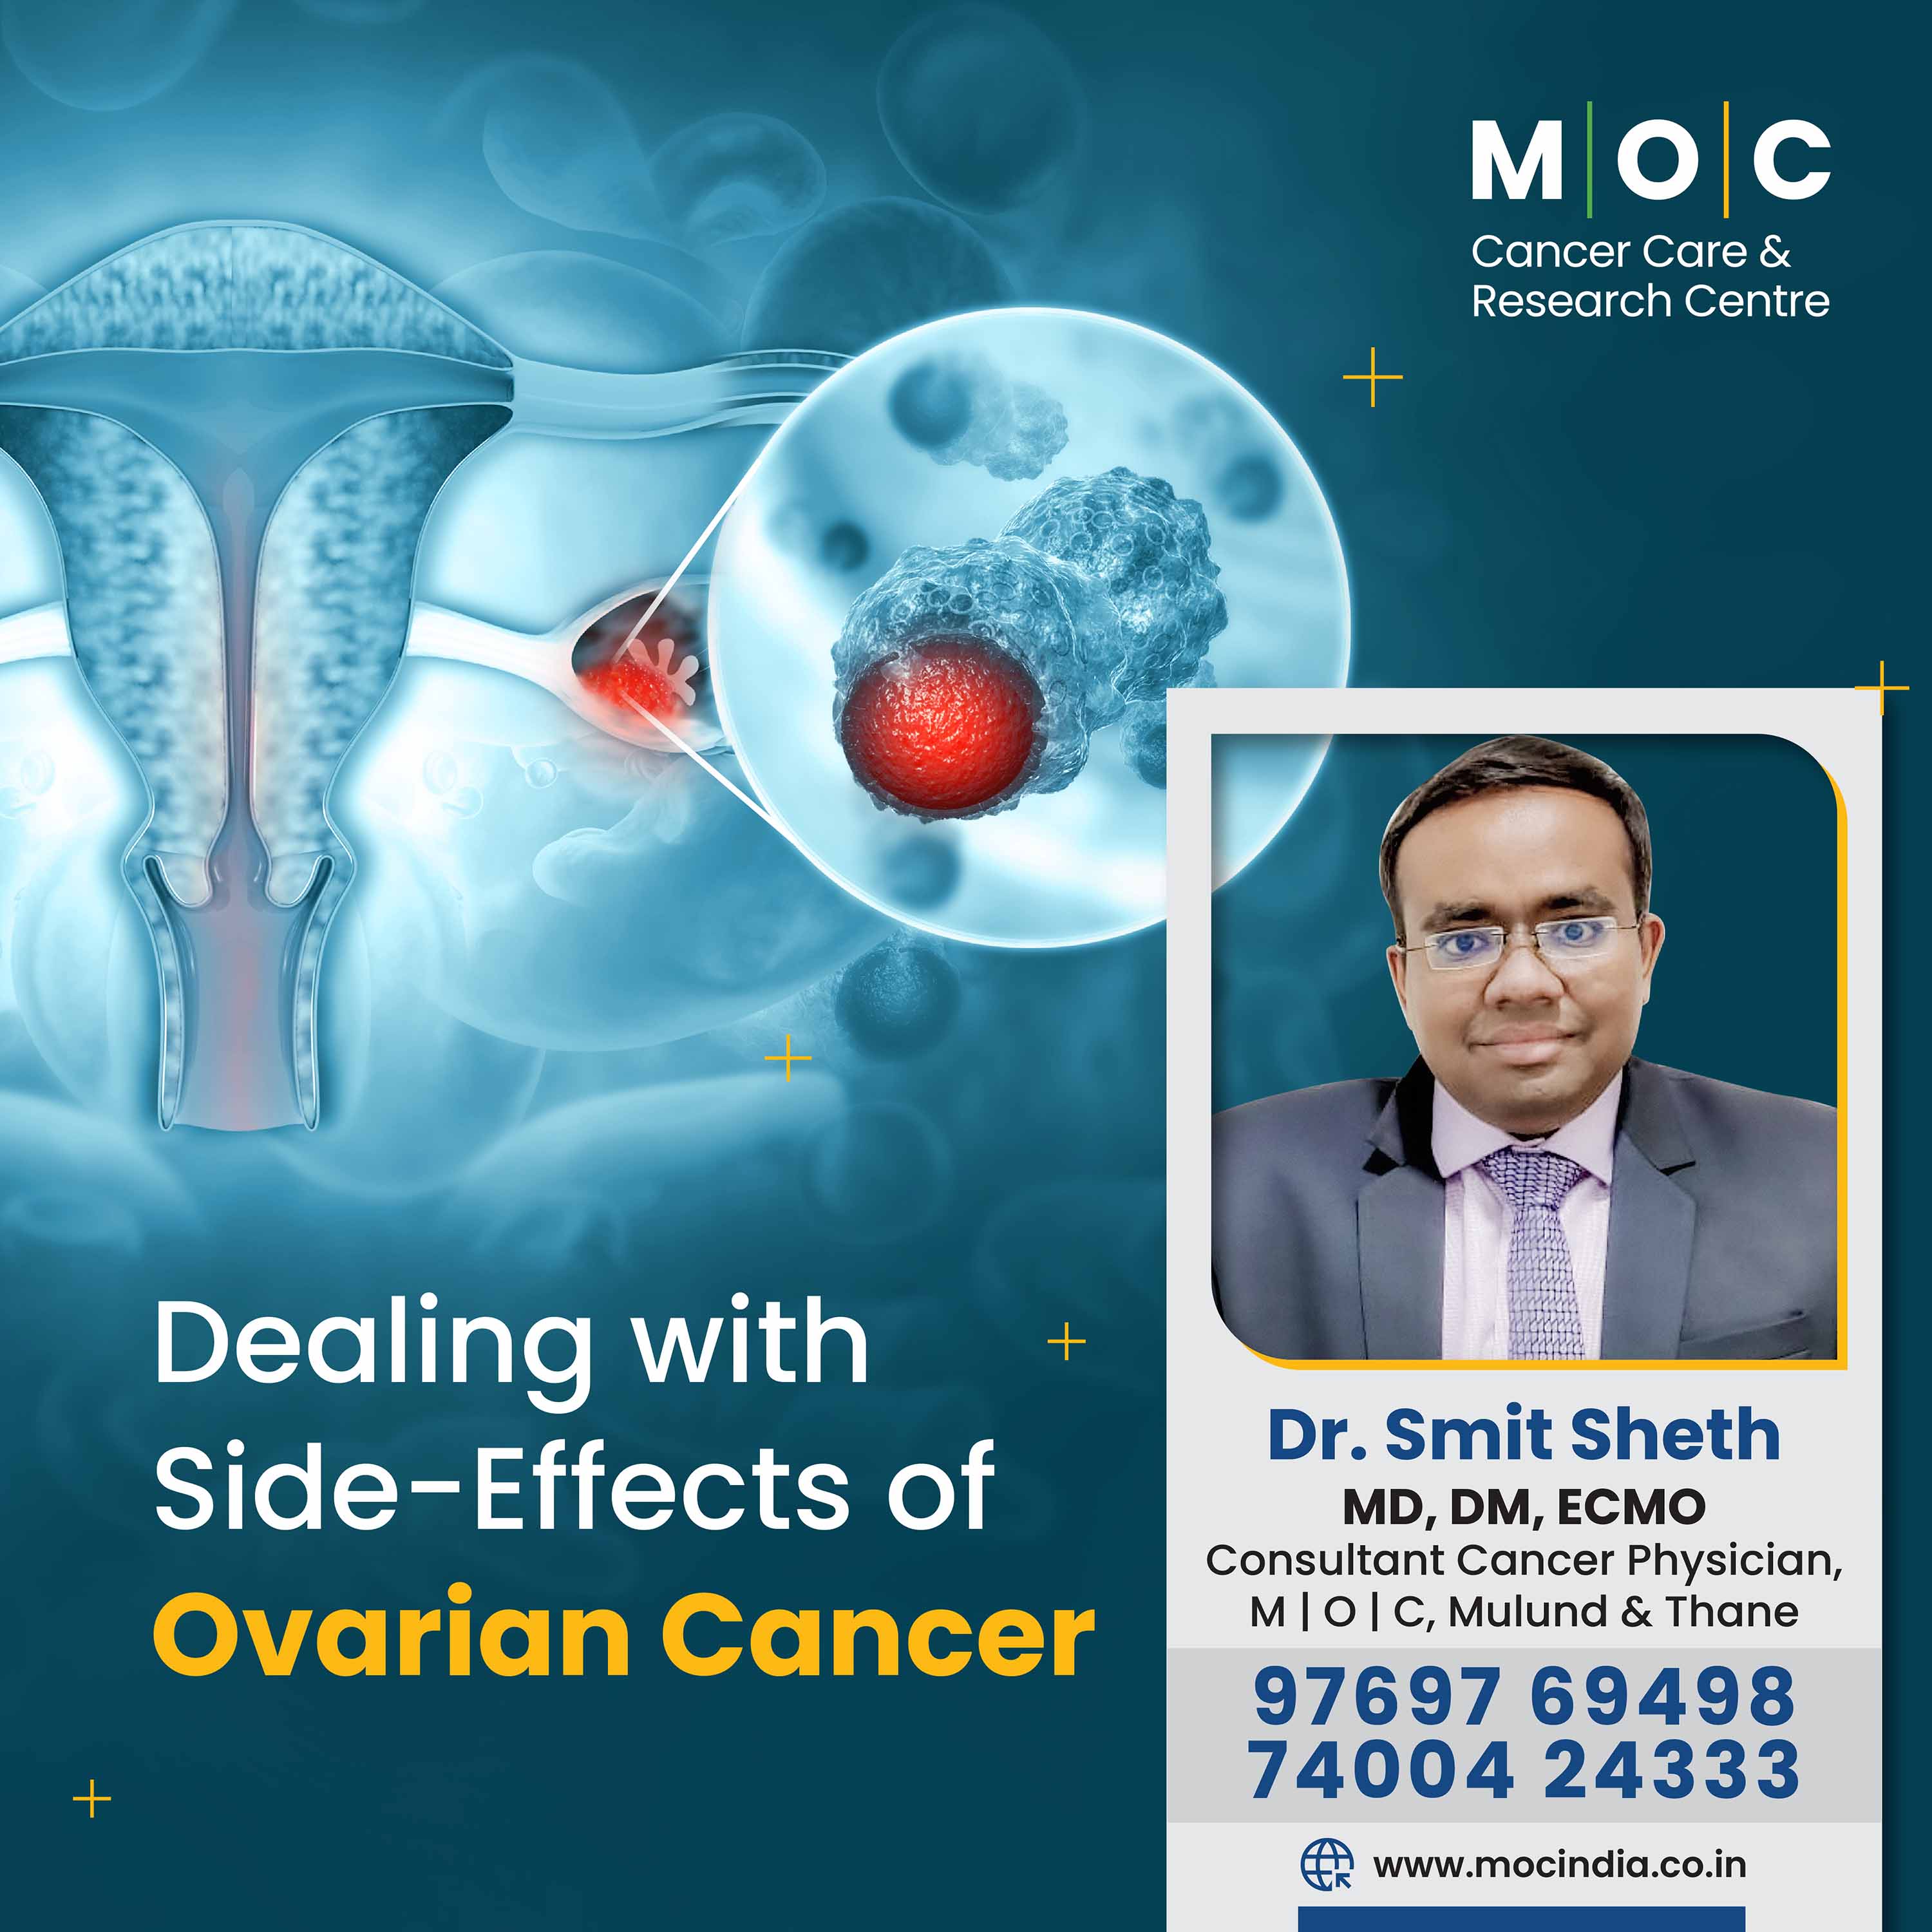 Dealing with Side - Effects of Ovarian Cancer.